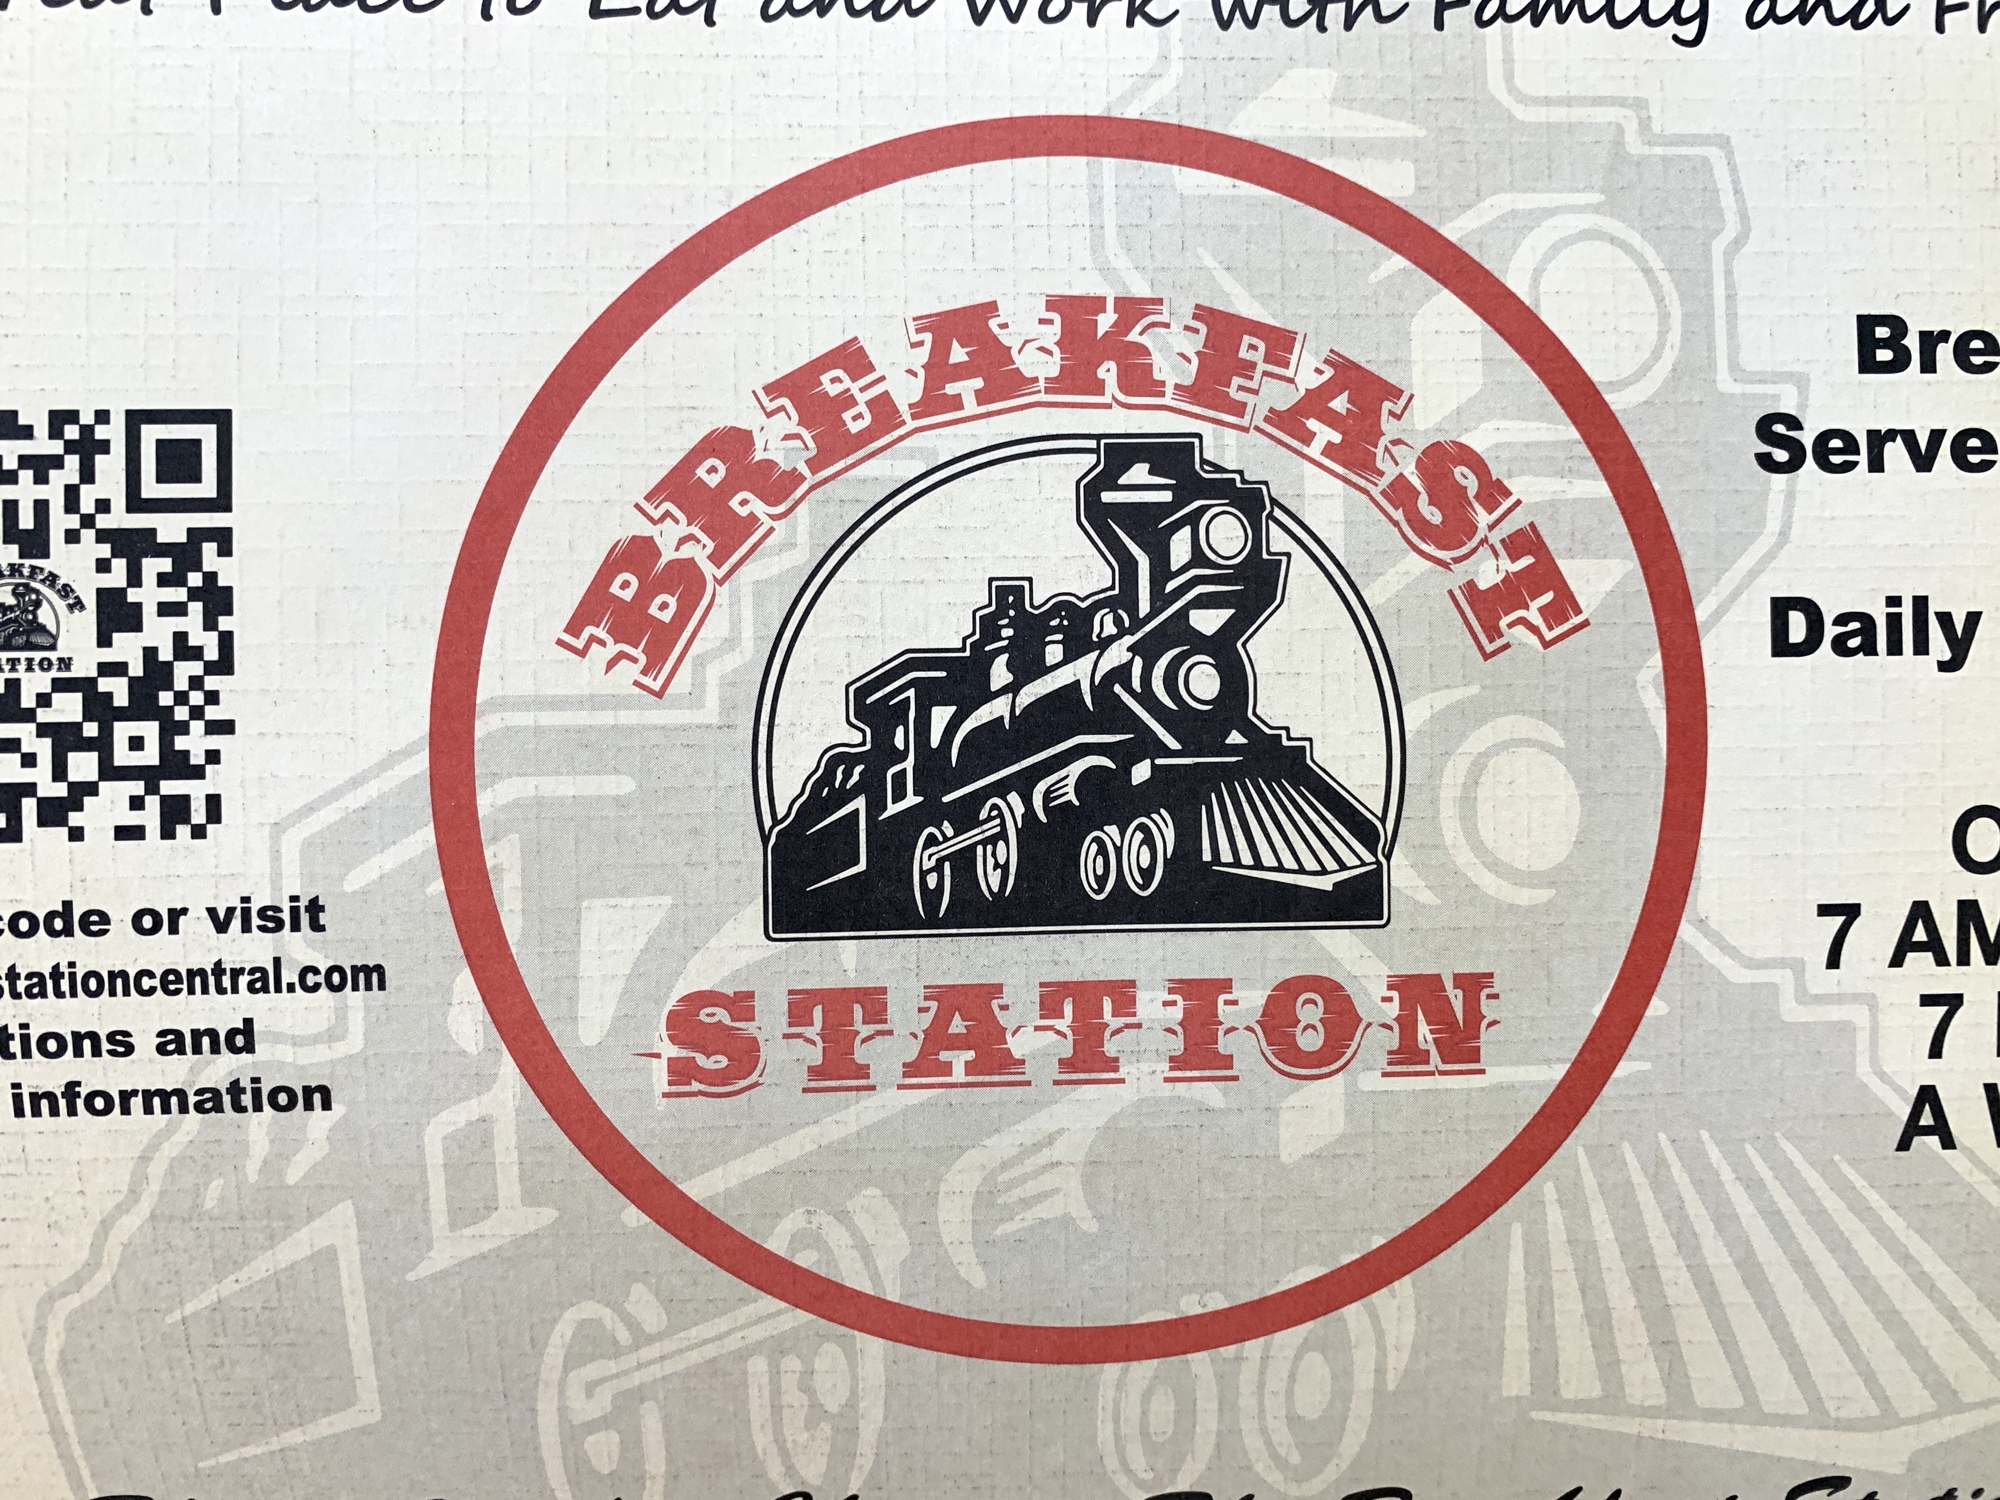 The Breakfast Station didn't start with a railroad theme. The original restaurant in the franchise was built by a railroad track, and customers brought in their memorabilia.